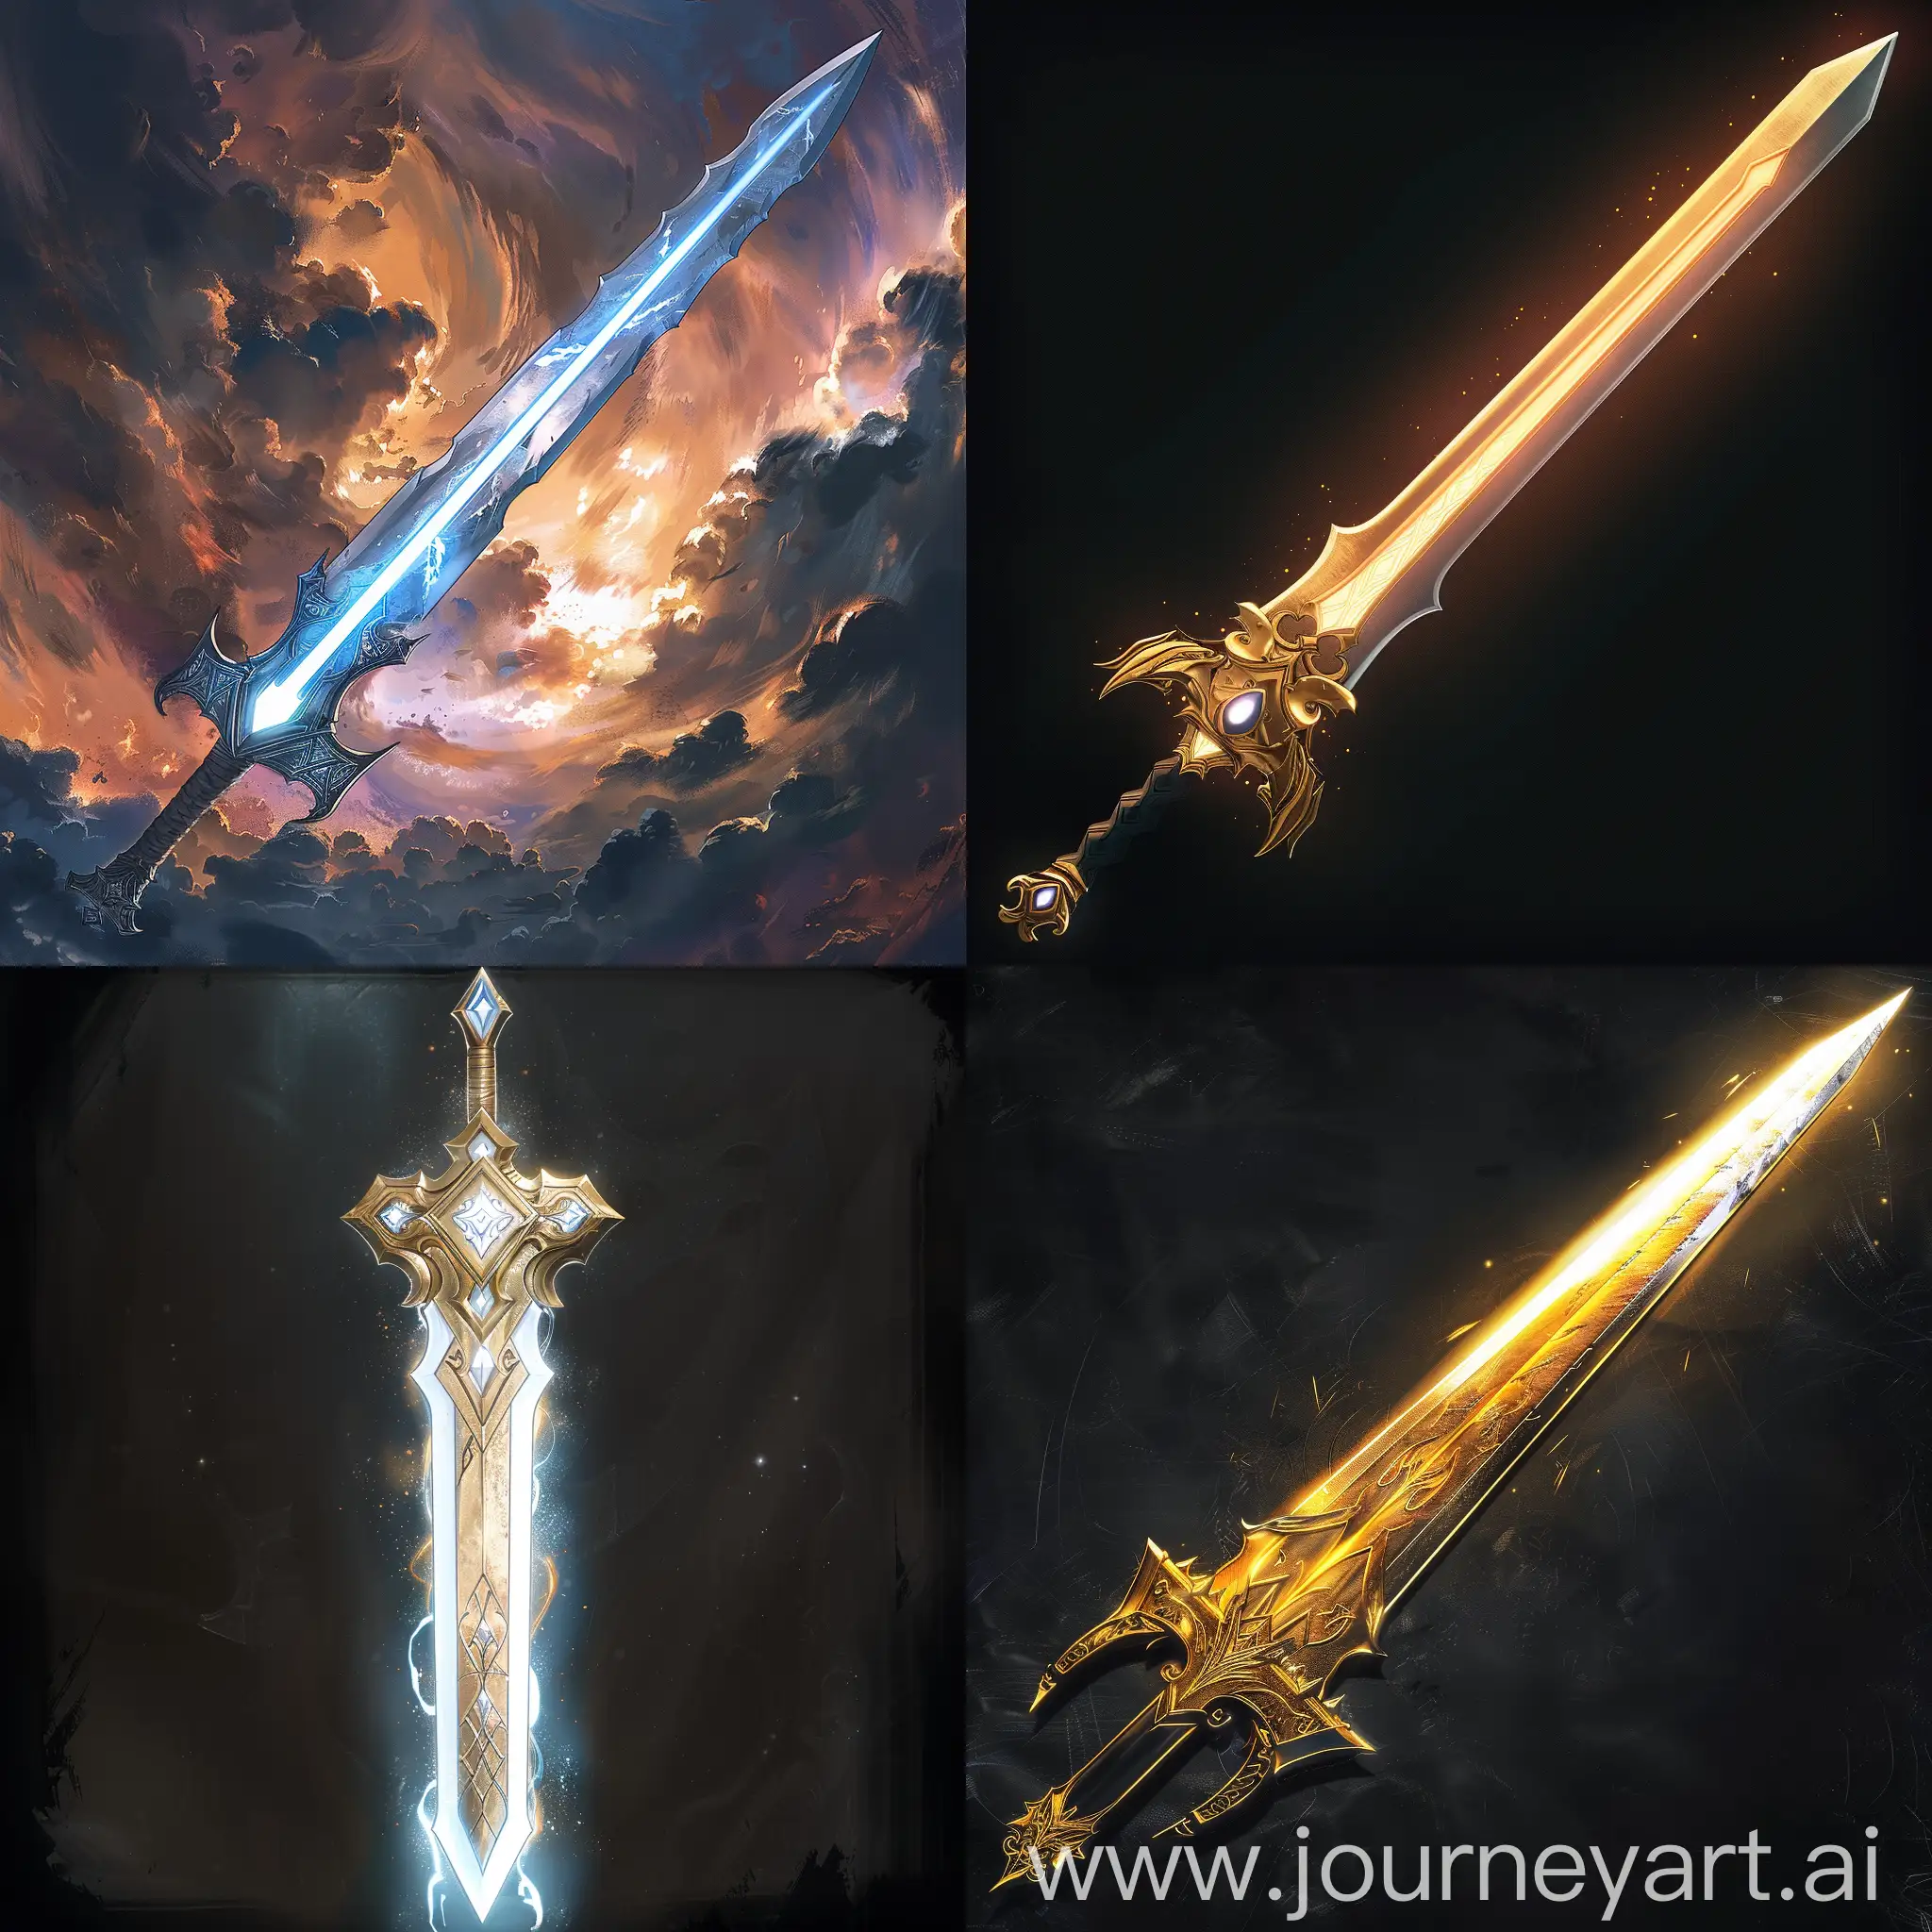 An anime style sacred divine sword of light, from a fantasy life.